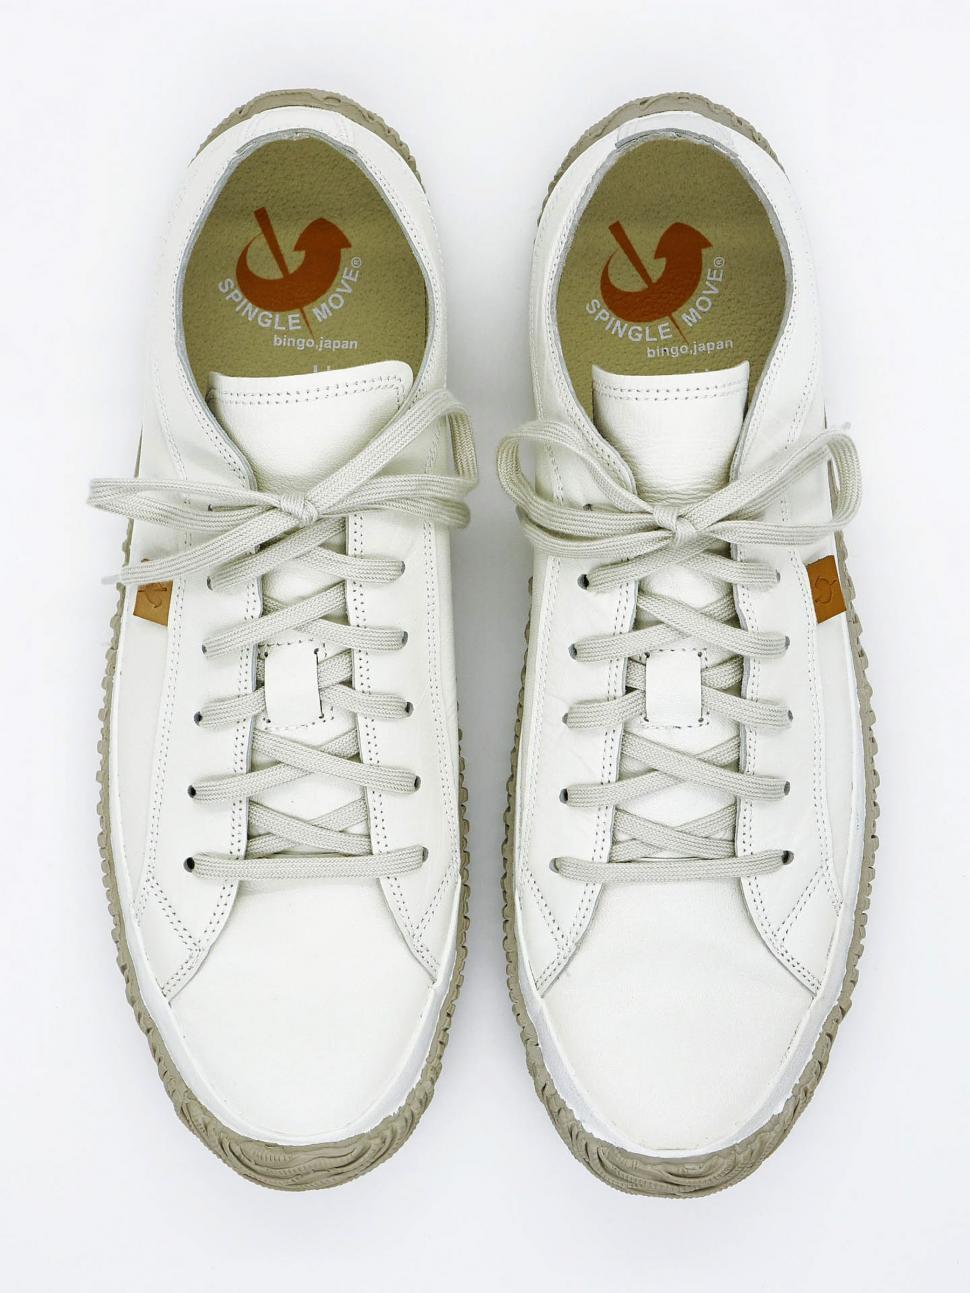 Free Image of White Sneaker Shoes 